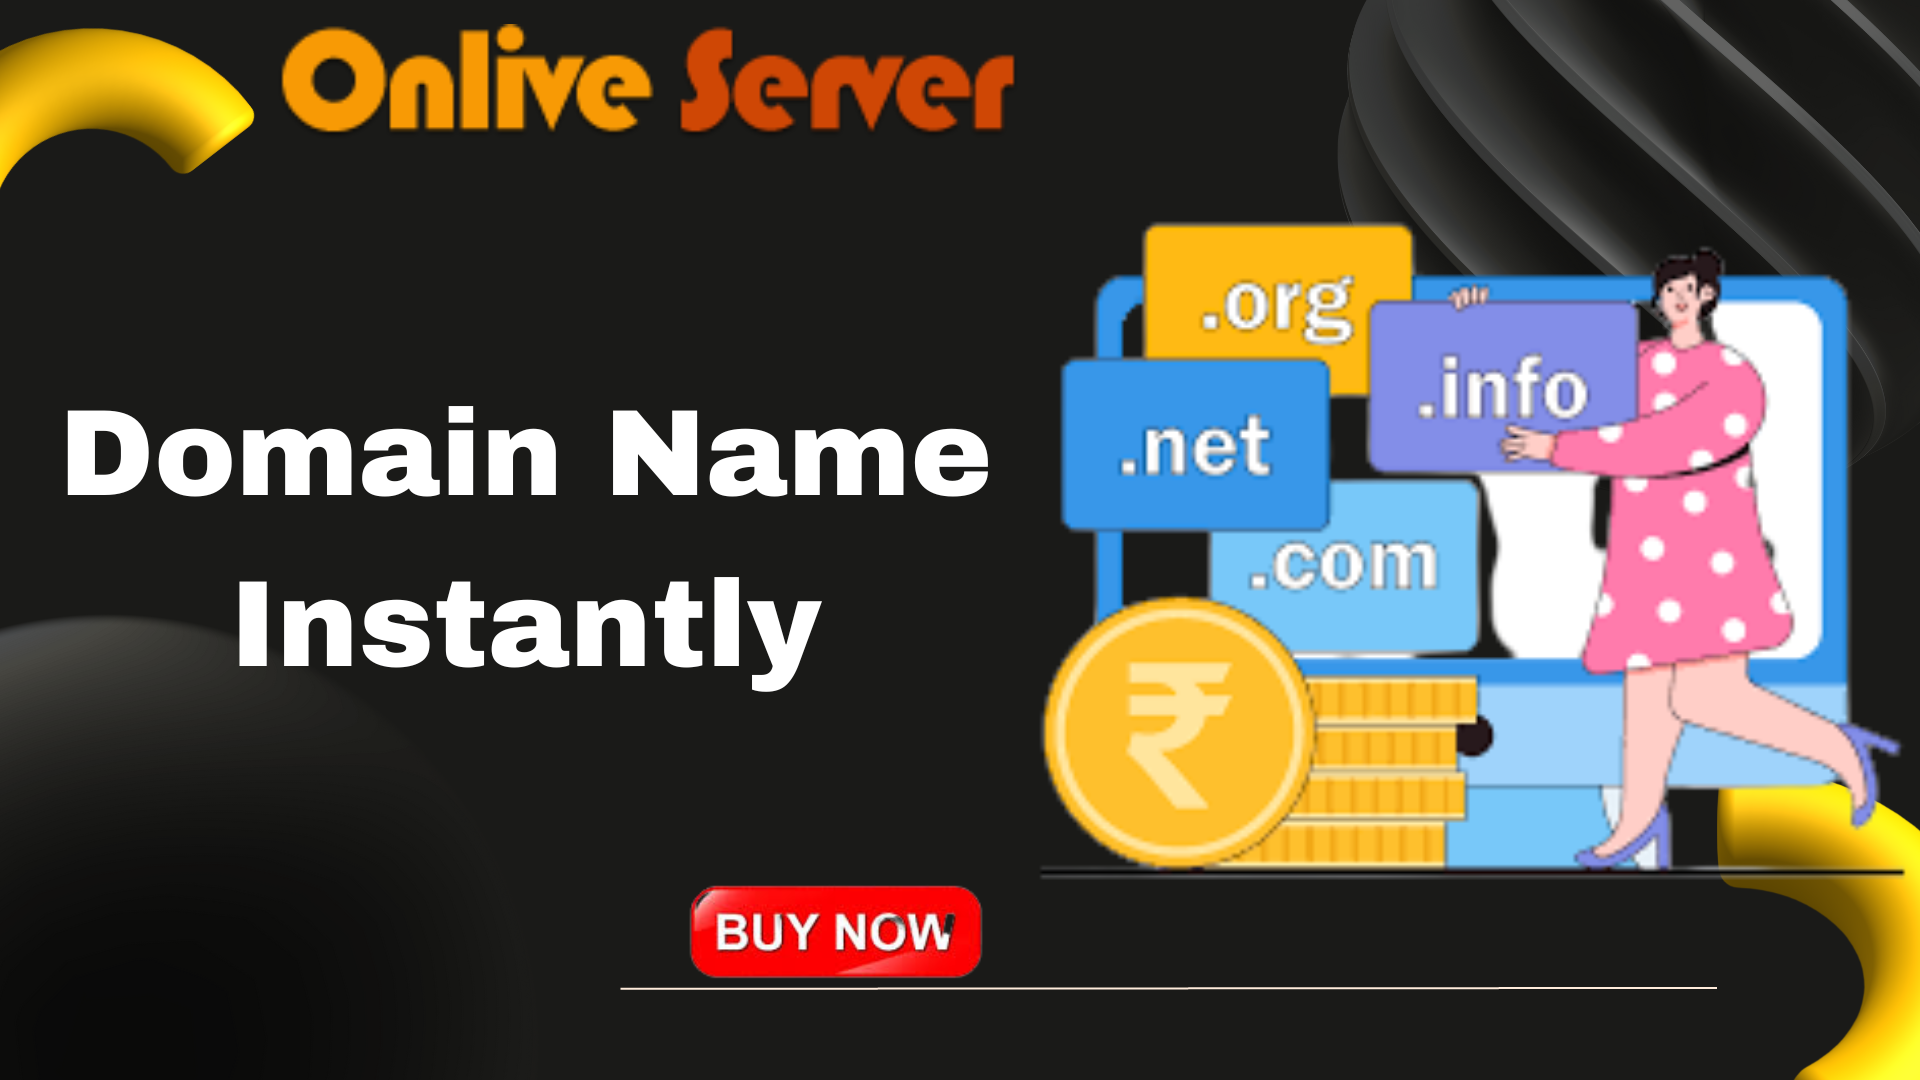 Domain Name Instantly